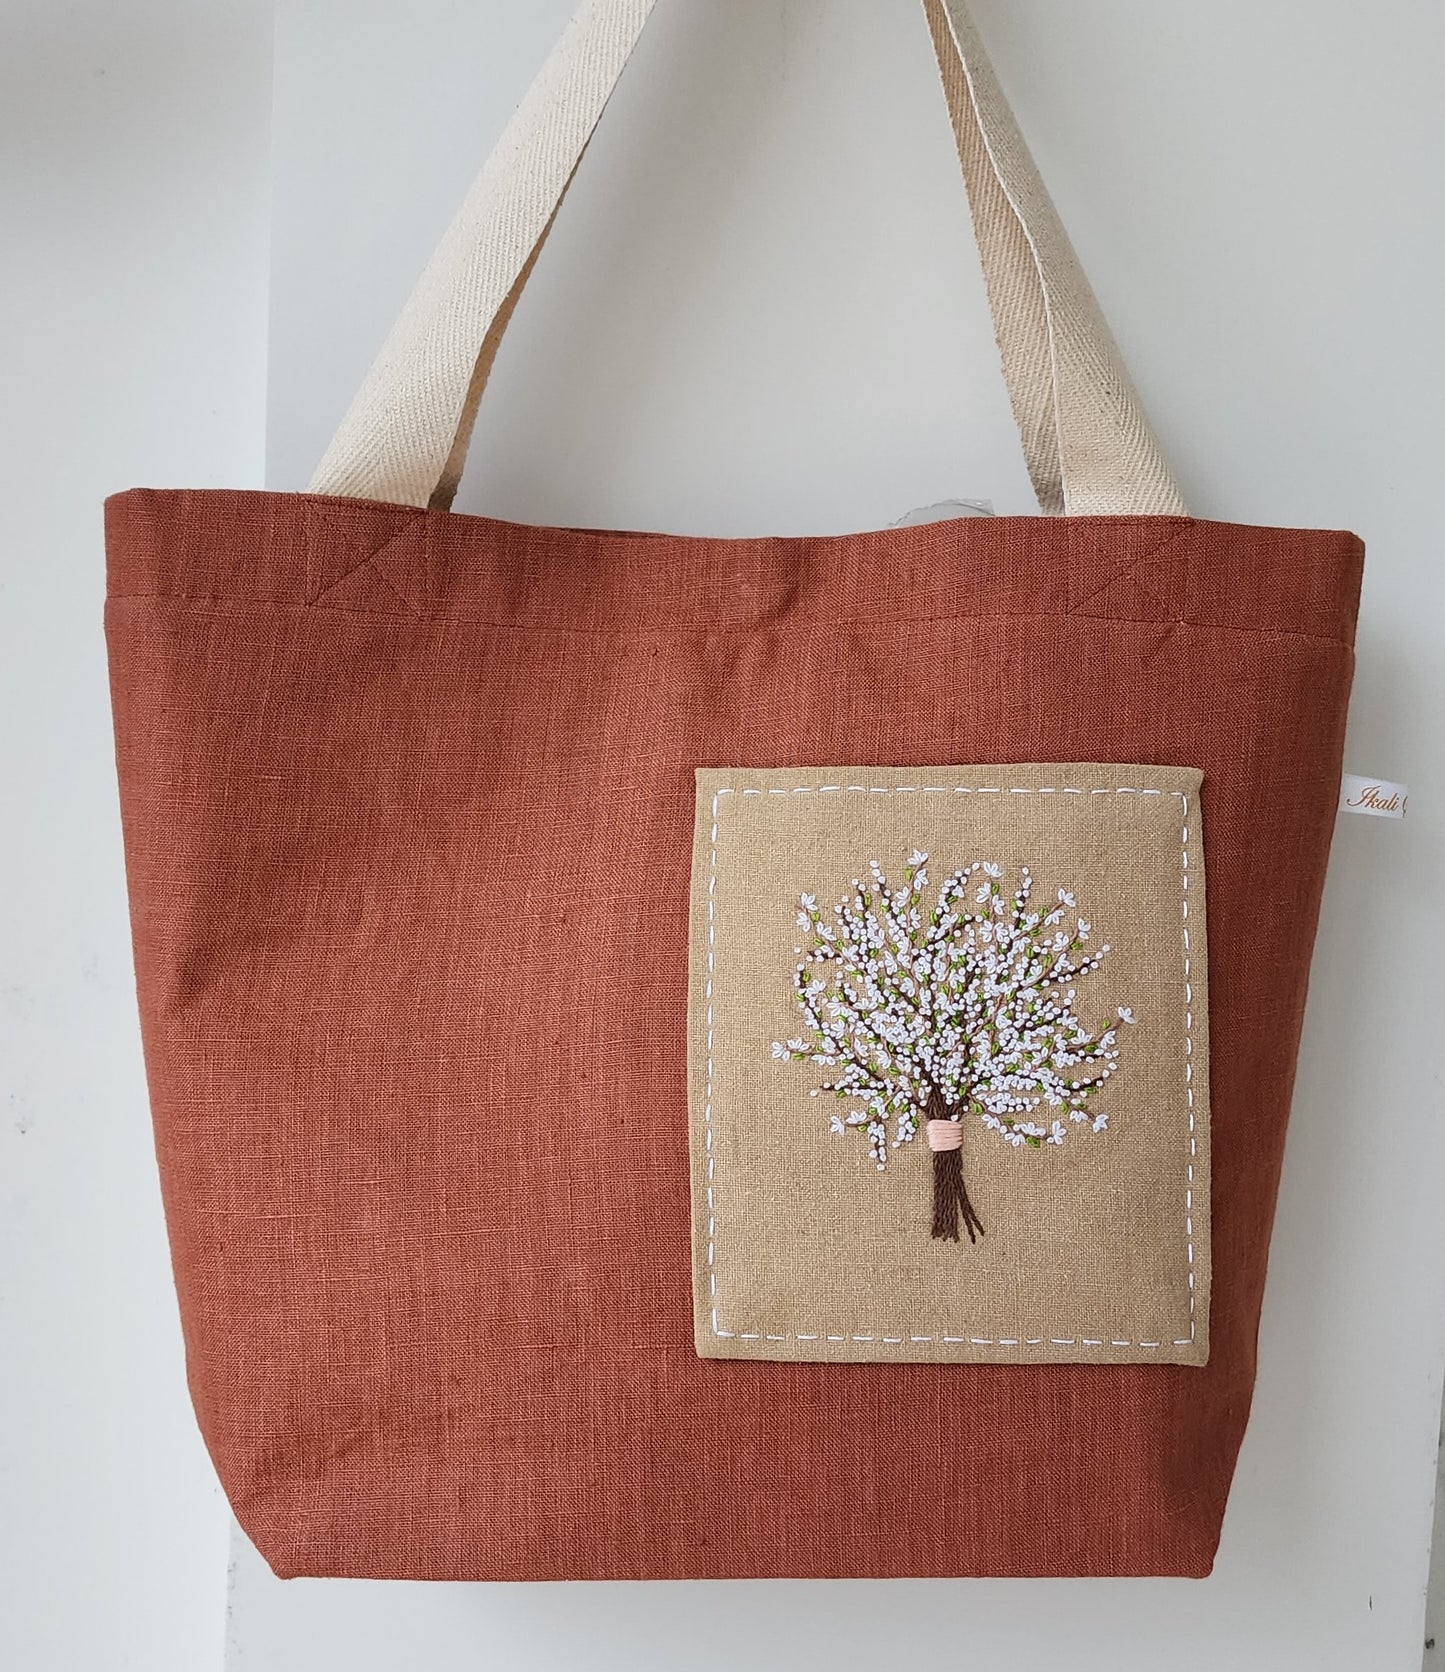 Ikali - Babies Breathe - Hand-embroidered Tote